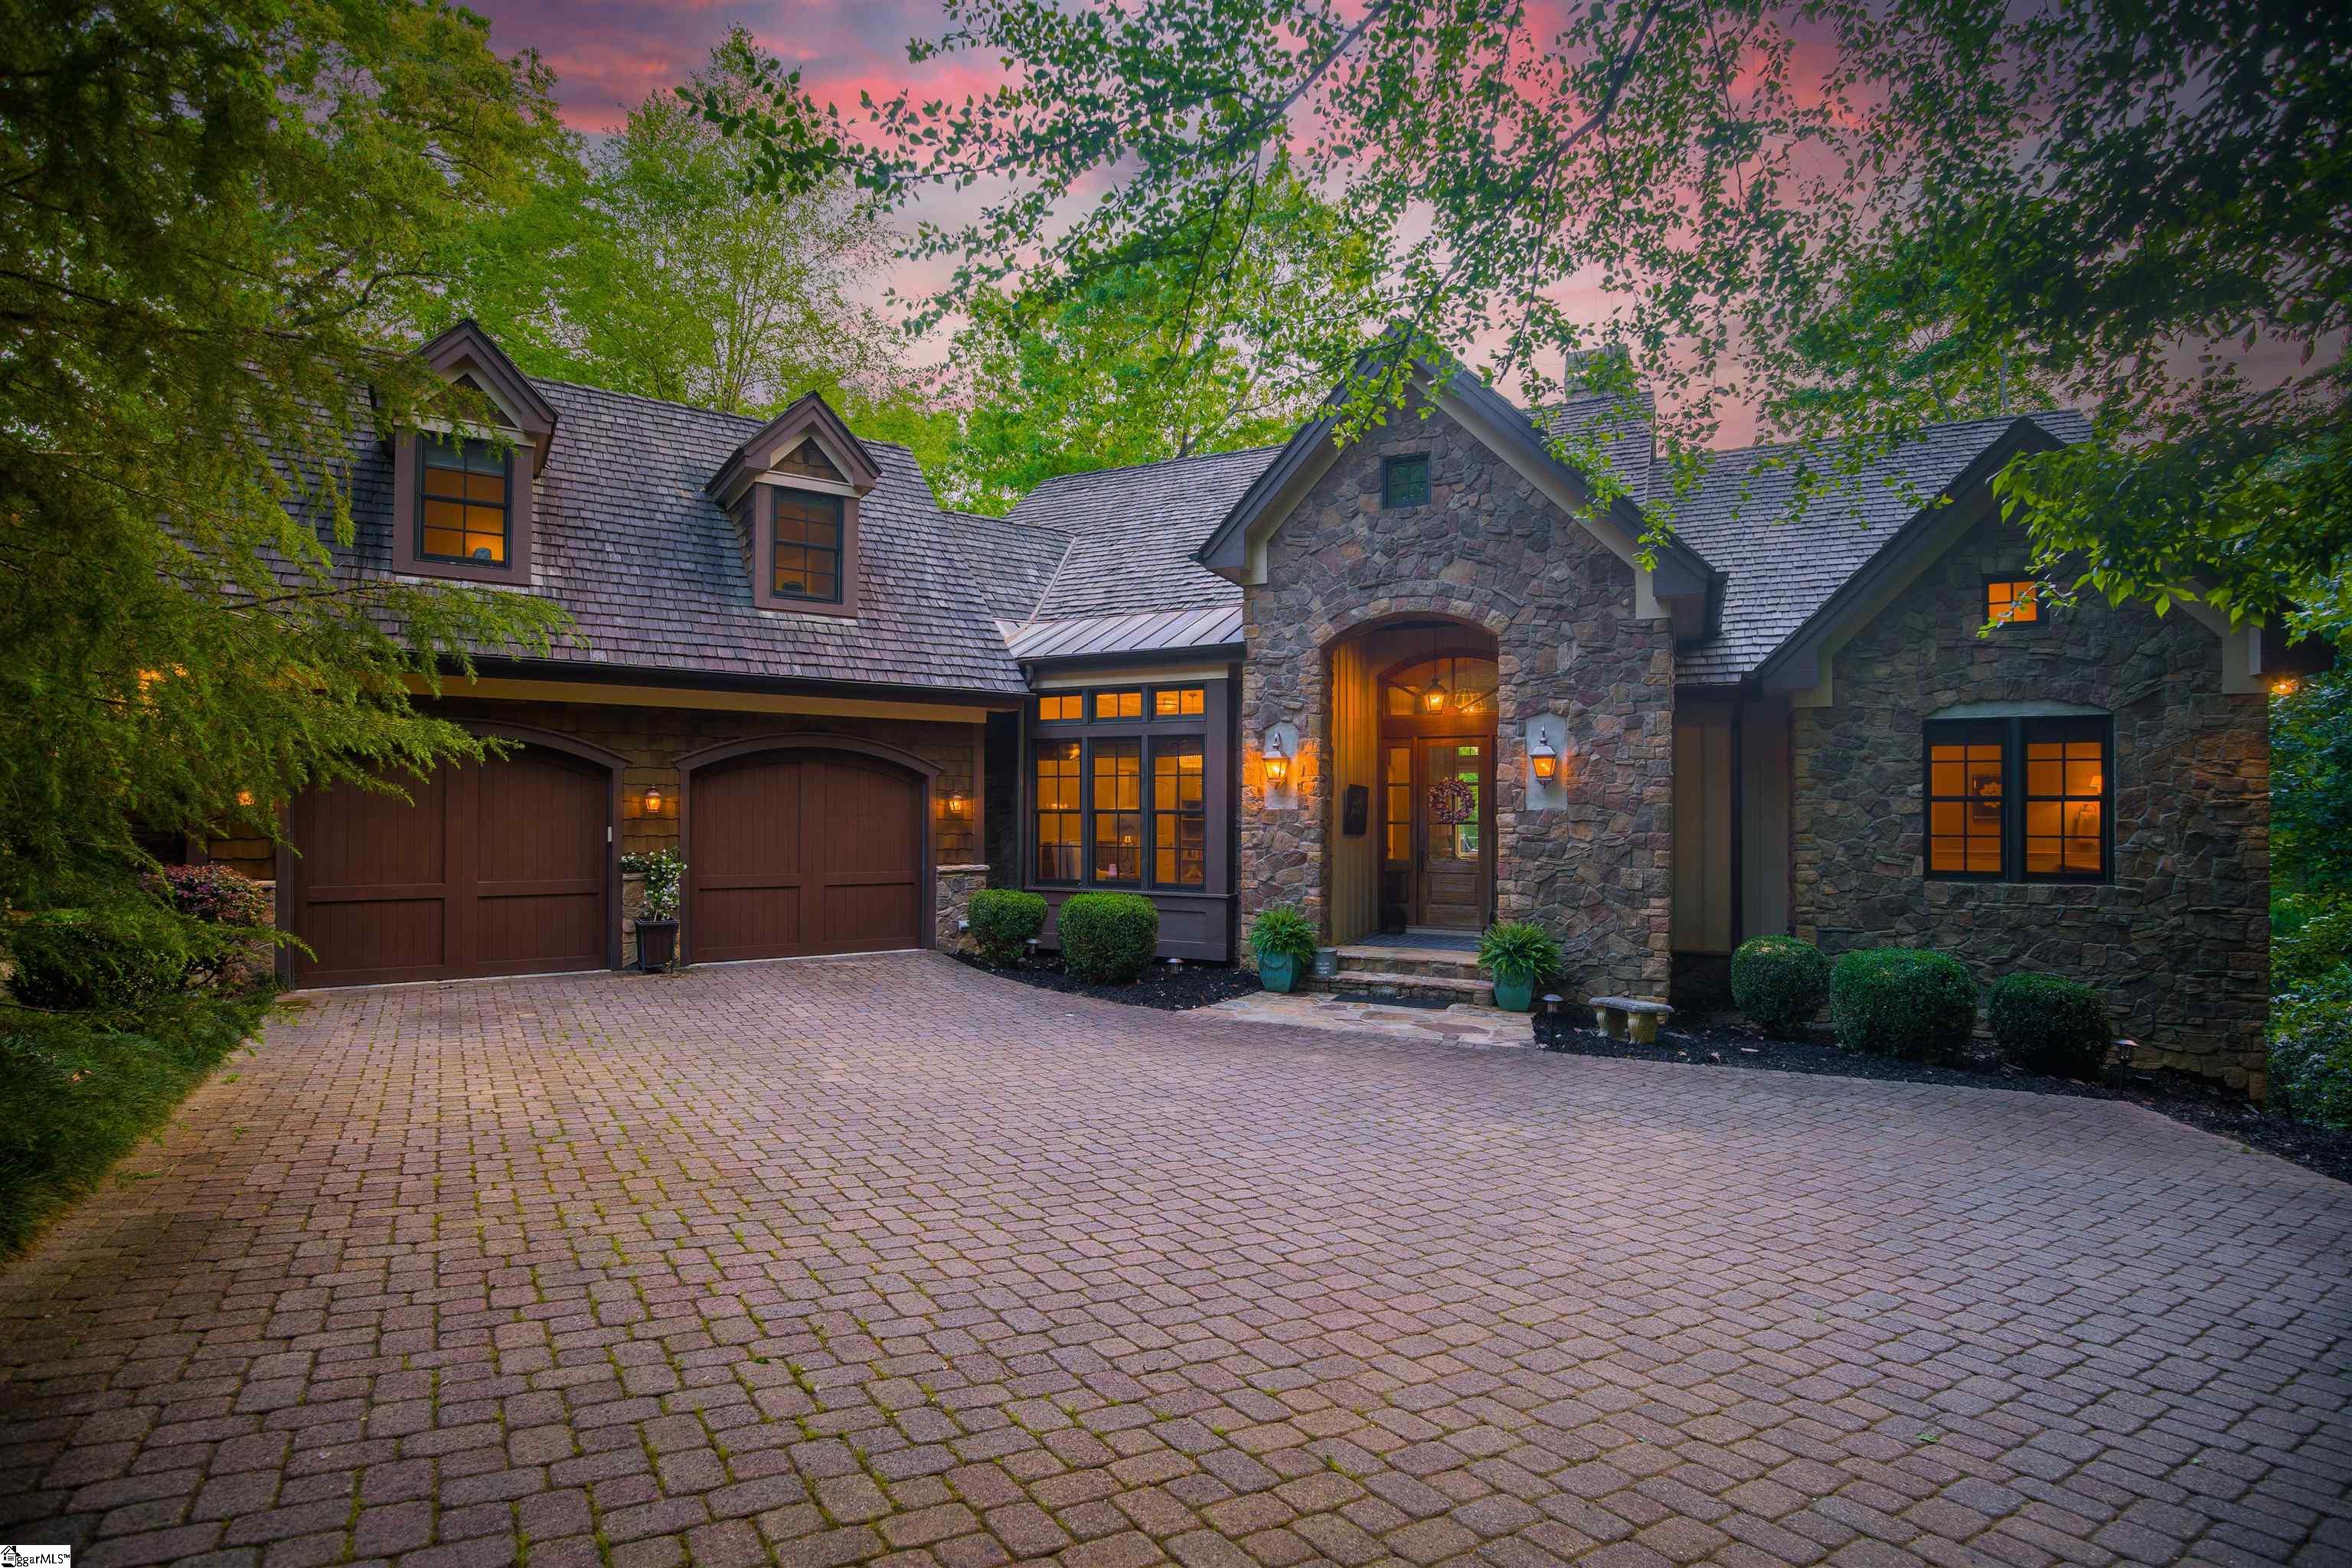 Casually Elegant. Originally constructed as a model home for esteemed Allora builders in 2007, 108 White Magnolia is dripping in custom, bespoke features from floor to ceiling! A few notable features that are immediately apparent upon arrival, is the beautiful stone exterior, copper accents, copper gutters and cedar shake roof.   Home is situated nicely on almost an acre (0.9 acre), allowing for privacy, a nice backyard (hard to find in the mountains!) and direct access to nature trails. Once inside, a large great room awaits with soaring coffered ceilings, a stacked stone fireplace and a wall of windows overlooking the natural mountainscape to the rear. Hickory floors run the throughout the main level. A beautiful kitchen and dining room overlook the living room. Kitchen offers Viking appliances, Sub Zero refrigerator, a breakfast bar, and island with vegetable sink. The adjacent screened porch has a very cozy treehouse vibe and is a popular hangout spot. If dining al fresco is more your speed, a large back deck can easily accommodate. Back inside on the main level you’ll find a gracious study (fourth bedroom or formal dining) just off the foyer with built ins, coffered ceiling and an adjacent full bath and bar. The master suite is a dream… offering a luxurious bath with jacuzzi tub, dual vanities and tile shower. Also offers direct access to the back deck.   Find your way downstairs to find a lower den/rec room that is ready to host your next movie night. Two guest bedrooms with en suite baths can be found on either side of the lower den. A back terrace offers a third outdoor living space.   A private suite can be found over the garage. Whether you need a game/craft room, man cave or private bedroom suite, that will truly fit the bill.   Do you enjoy natural amenities like hiking trails, rivers and lakes? Or perhaps manicured, man made amenities are more your speed? At 108 White Magnolia, you don’t have to choose. The property borders a 272 acre county park to the east with hiking and mountain biking trails, a fishing lake and a waterfall and streams. Within the Cliffs at Mountain Park, members are treated to world class amenities like a Gary Player Golf Course, Wellness Center, and the Cabin.. a fan favorite restaurant. Mountain Park is centrally located amongst the Mountain and Lake regions, offering members access to all 7 Cliffs Clubs. A Cliffs Membership is available for purchase with this property. Located 35 minutes to downtown Greenville, 45 minutes to Asheville, 10 Minutes to Traveler’s Rest and 5 minutes from neighboring Cliffs Valley.   Building a home of comparable quality in Mountain Park today, would cost $1,375,000.